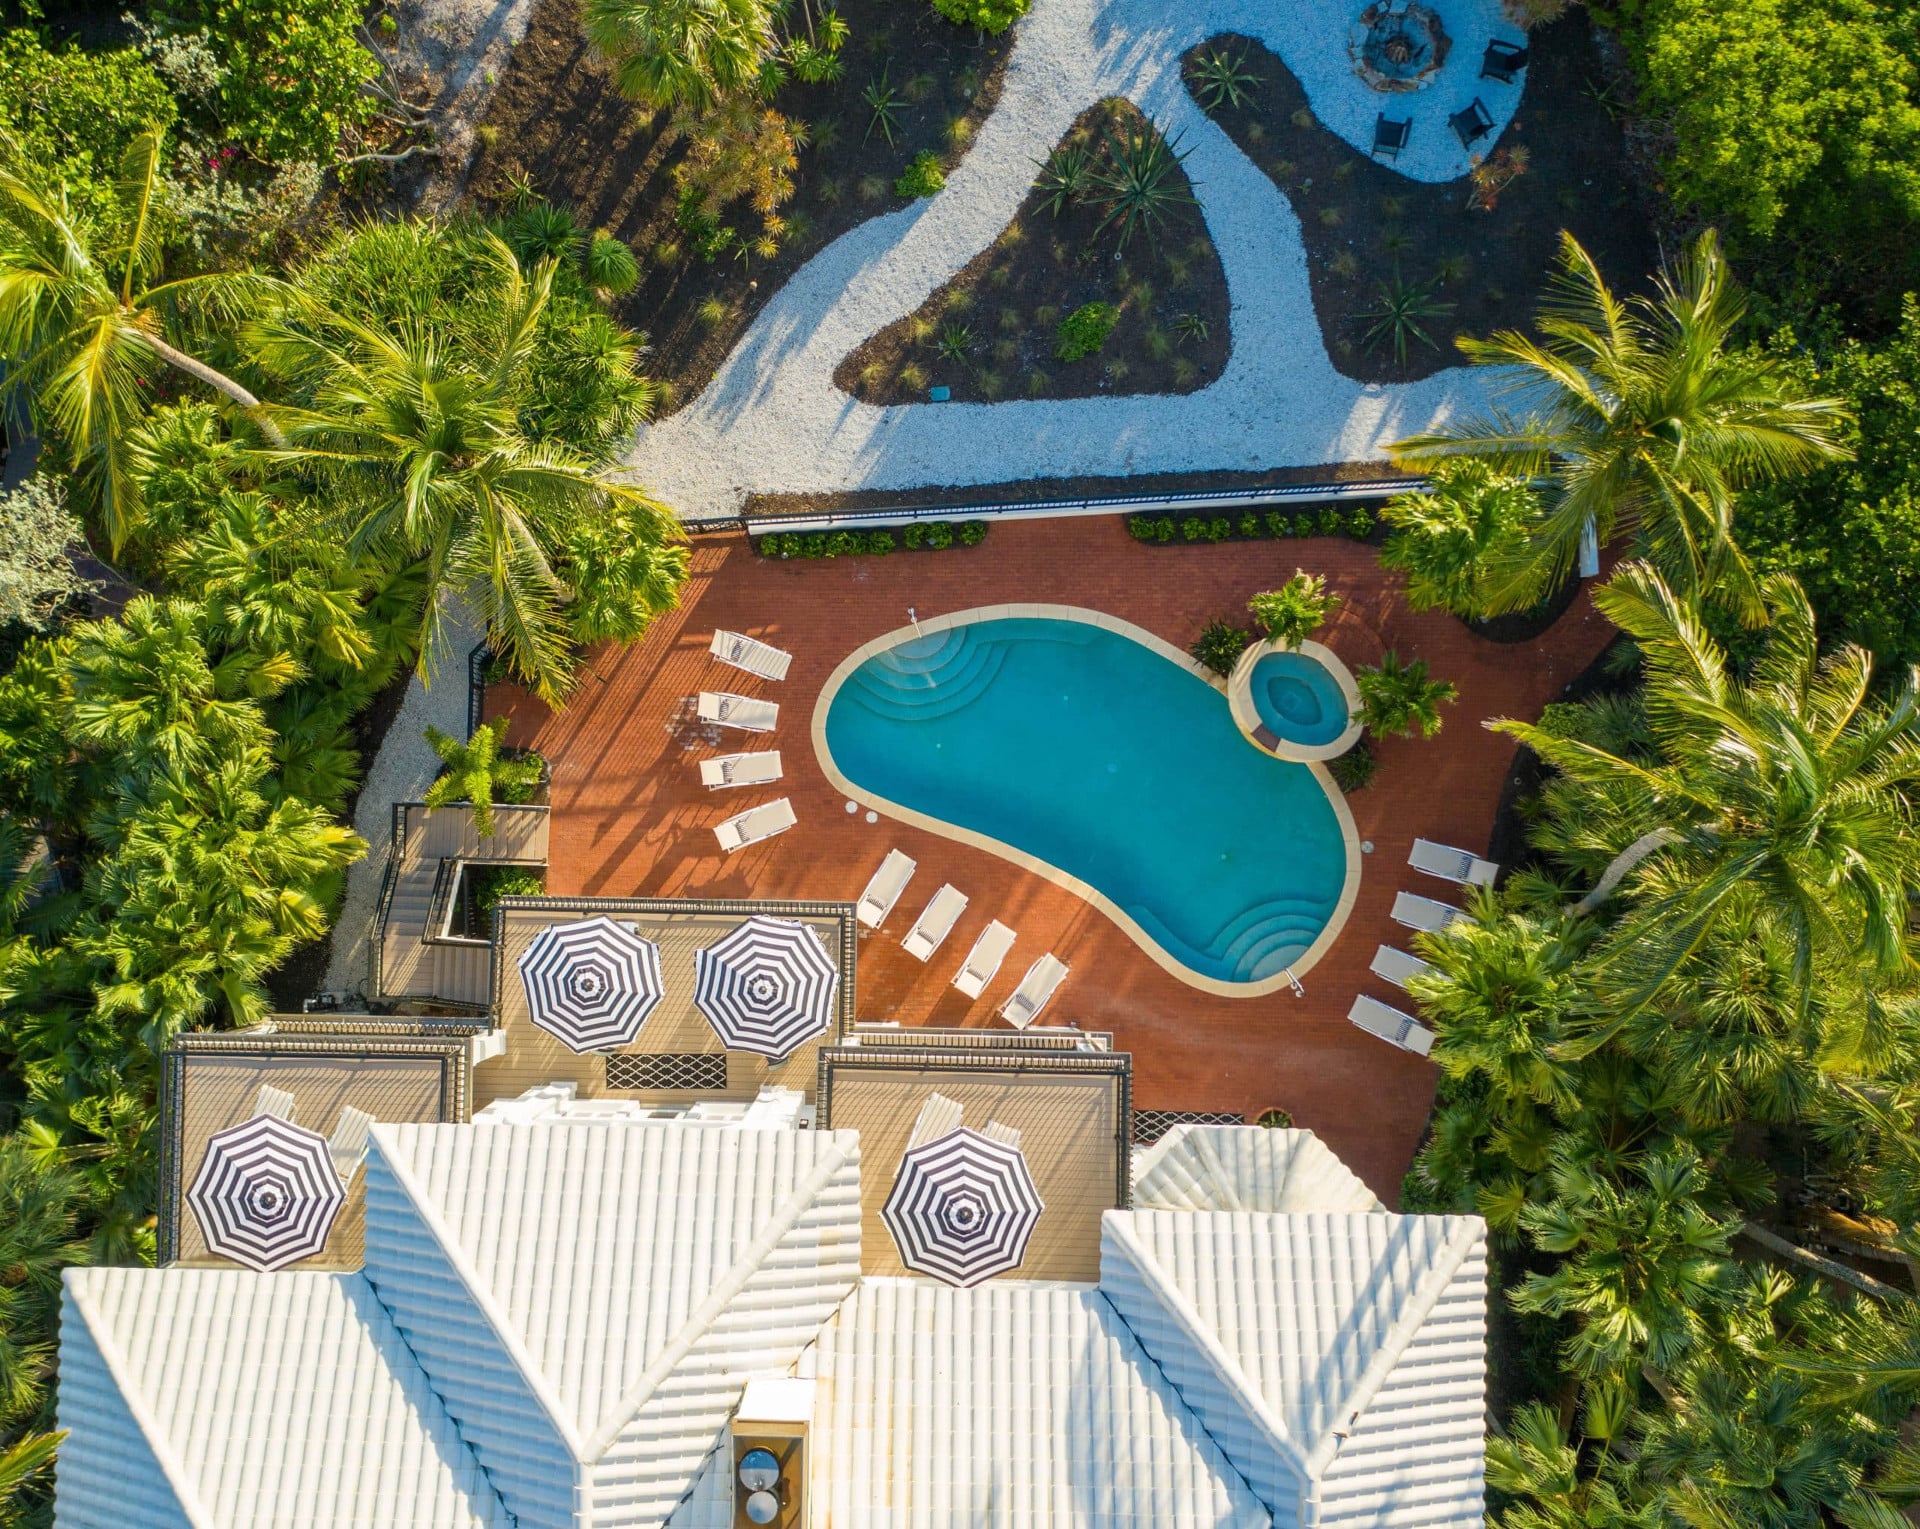 Bird's eye view of the pool area with white chairs, blue striped umbrella's and palm trees at the Sea Palms Estate in Captiva Island, FL